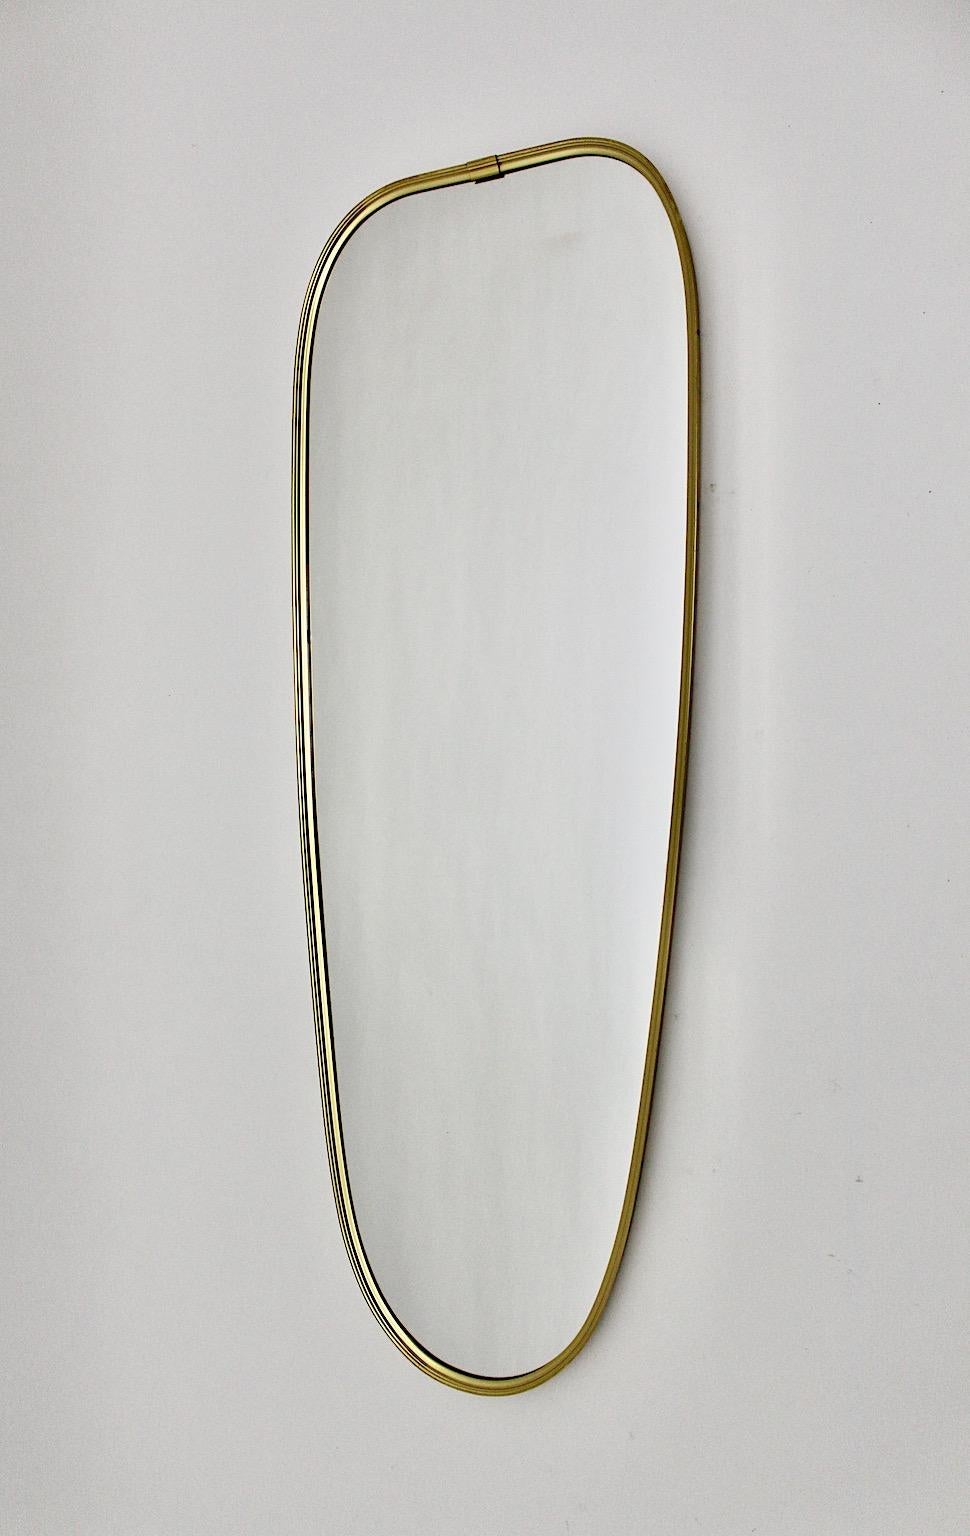 Mid-Century Modern vintage oval like full length mirror or floor mirror from brassed metal and mirror glass 1950s Austria.
Wonderful vintage full length mirror or floor mirror with brassed frame in elegant oval shape.
While the brassed frame shows